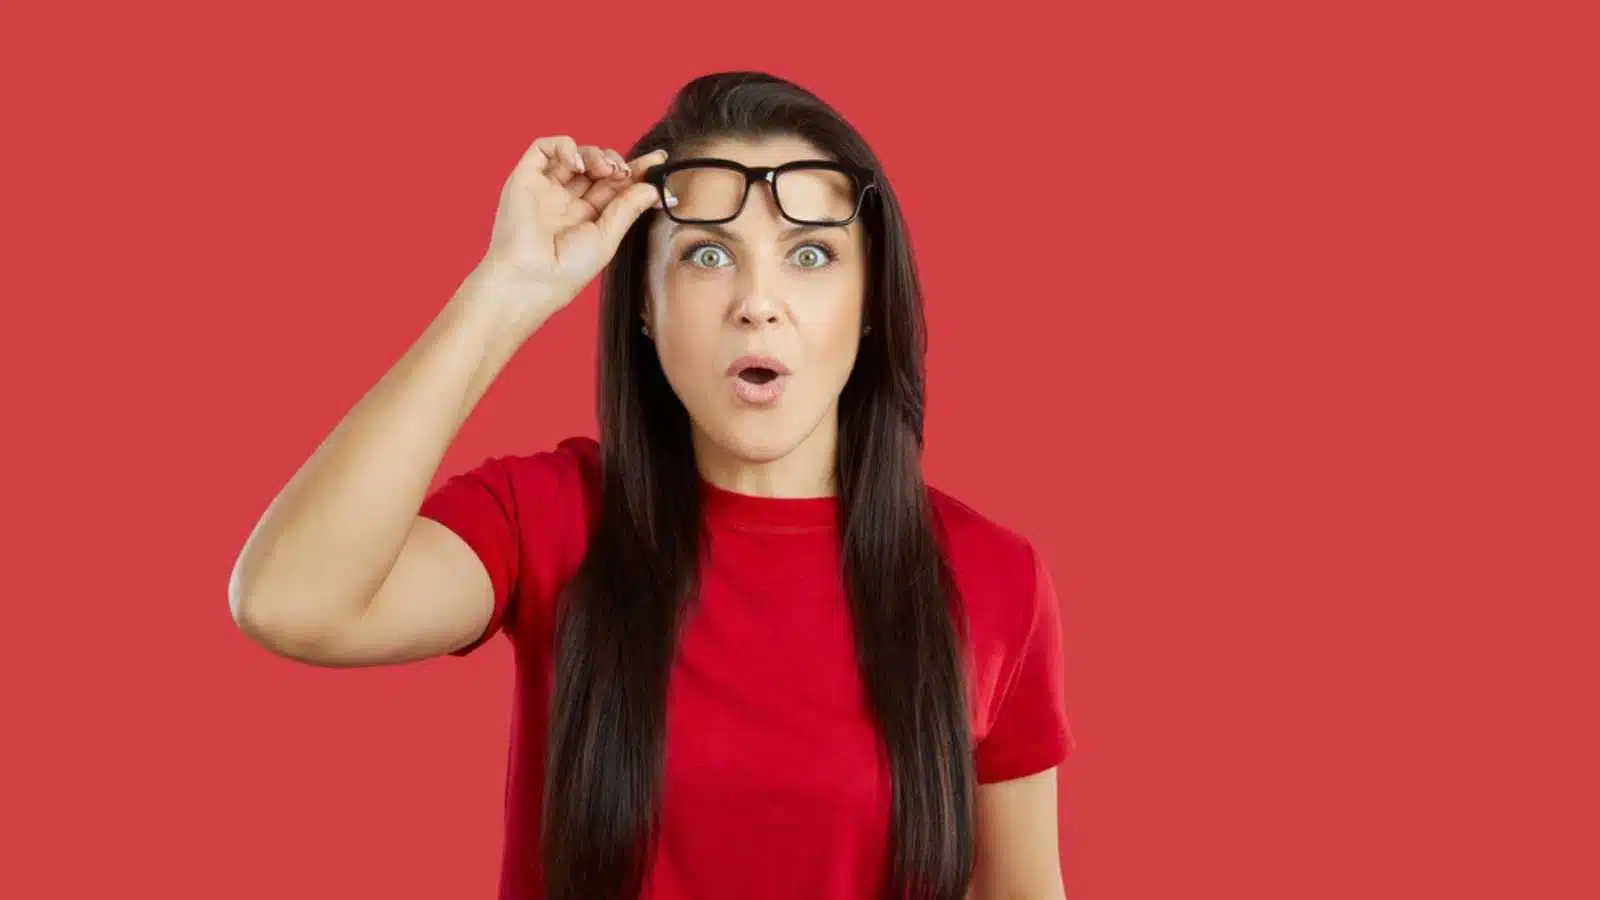 Woman shocked and removing specs